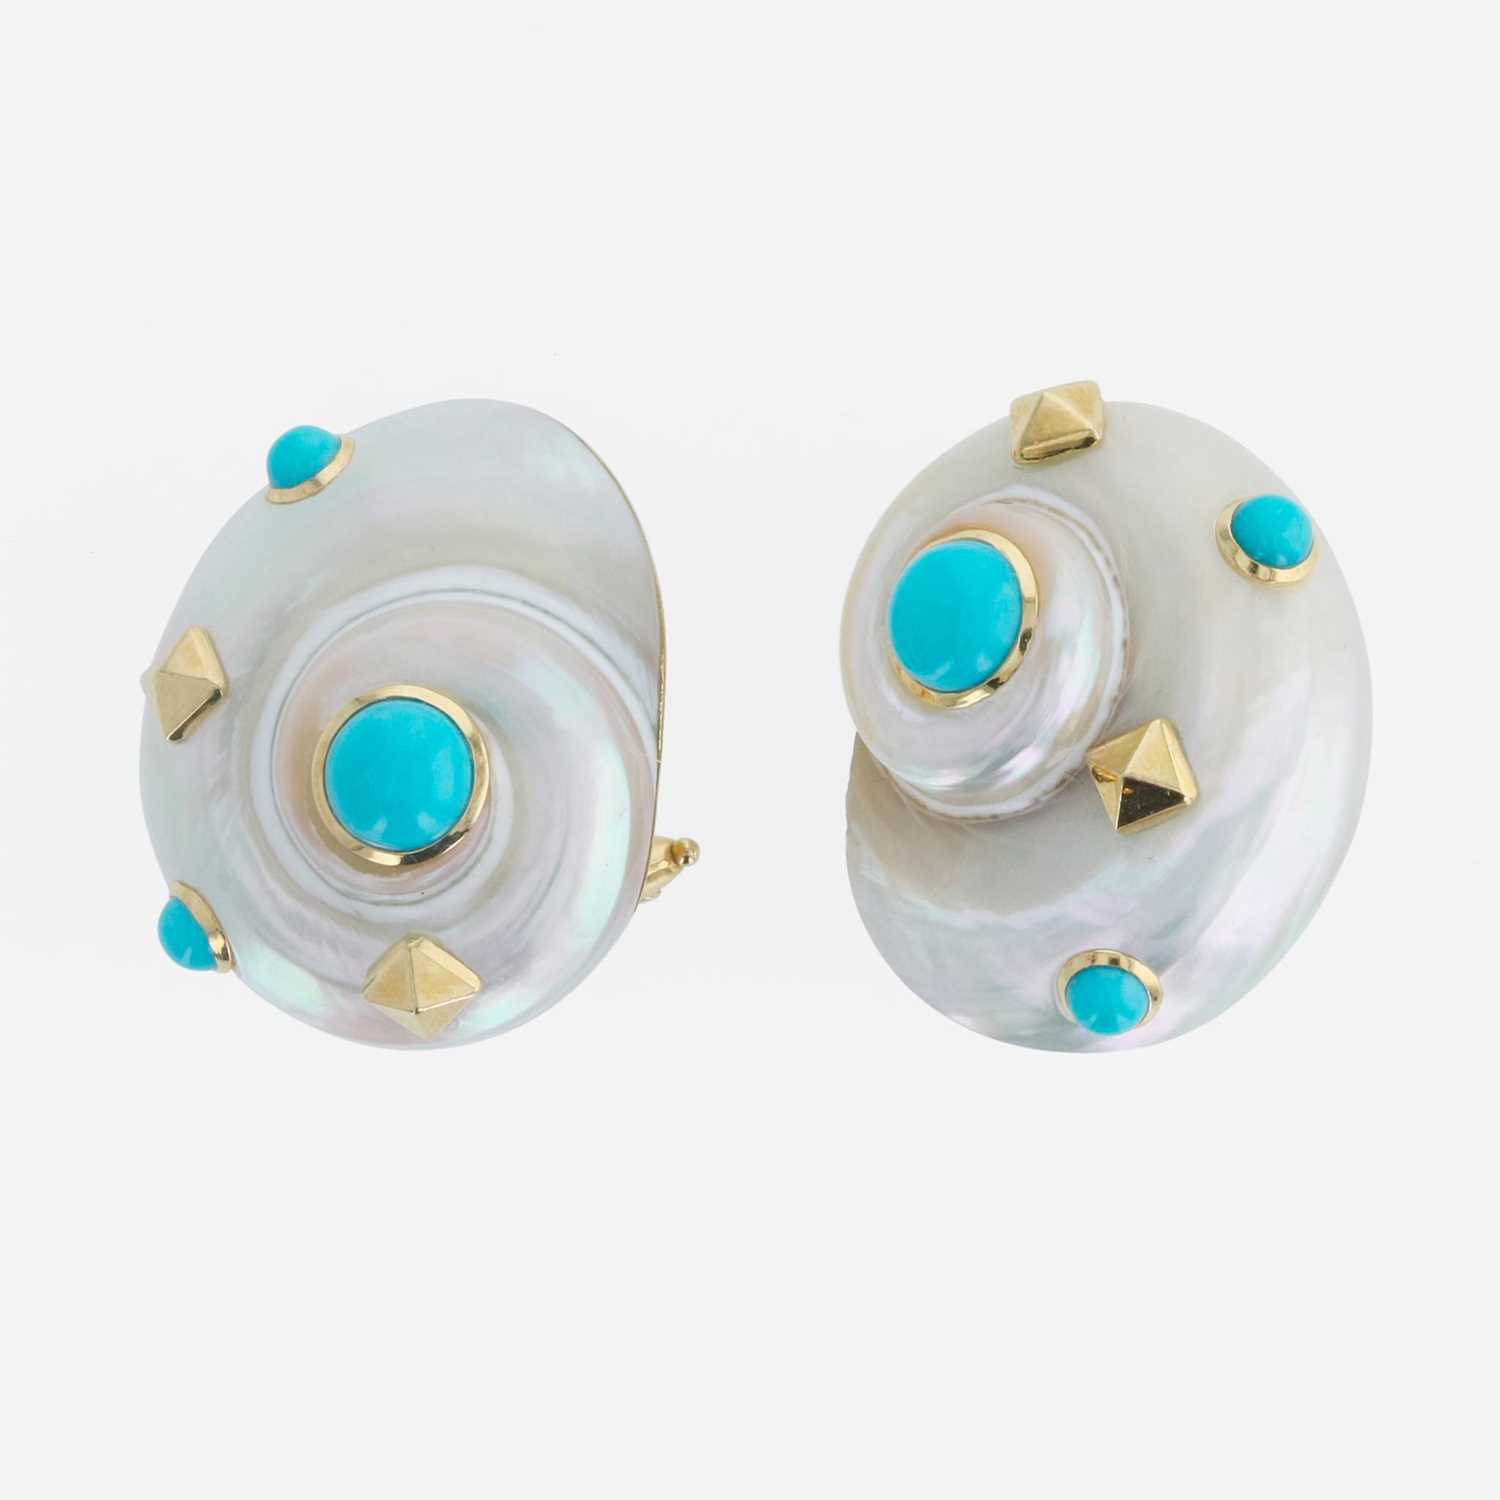 Lot 50 - A pair of 18K yellow gold, Umbonium shell, and turquoise earrings, Trianon